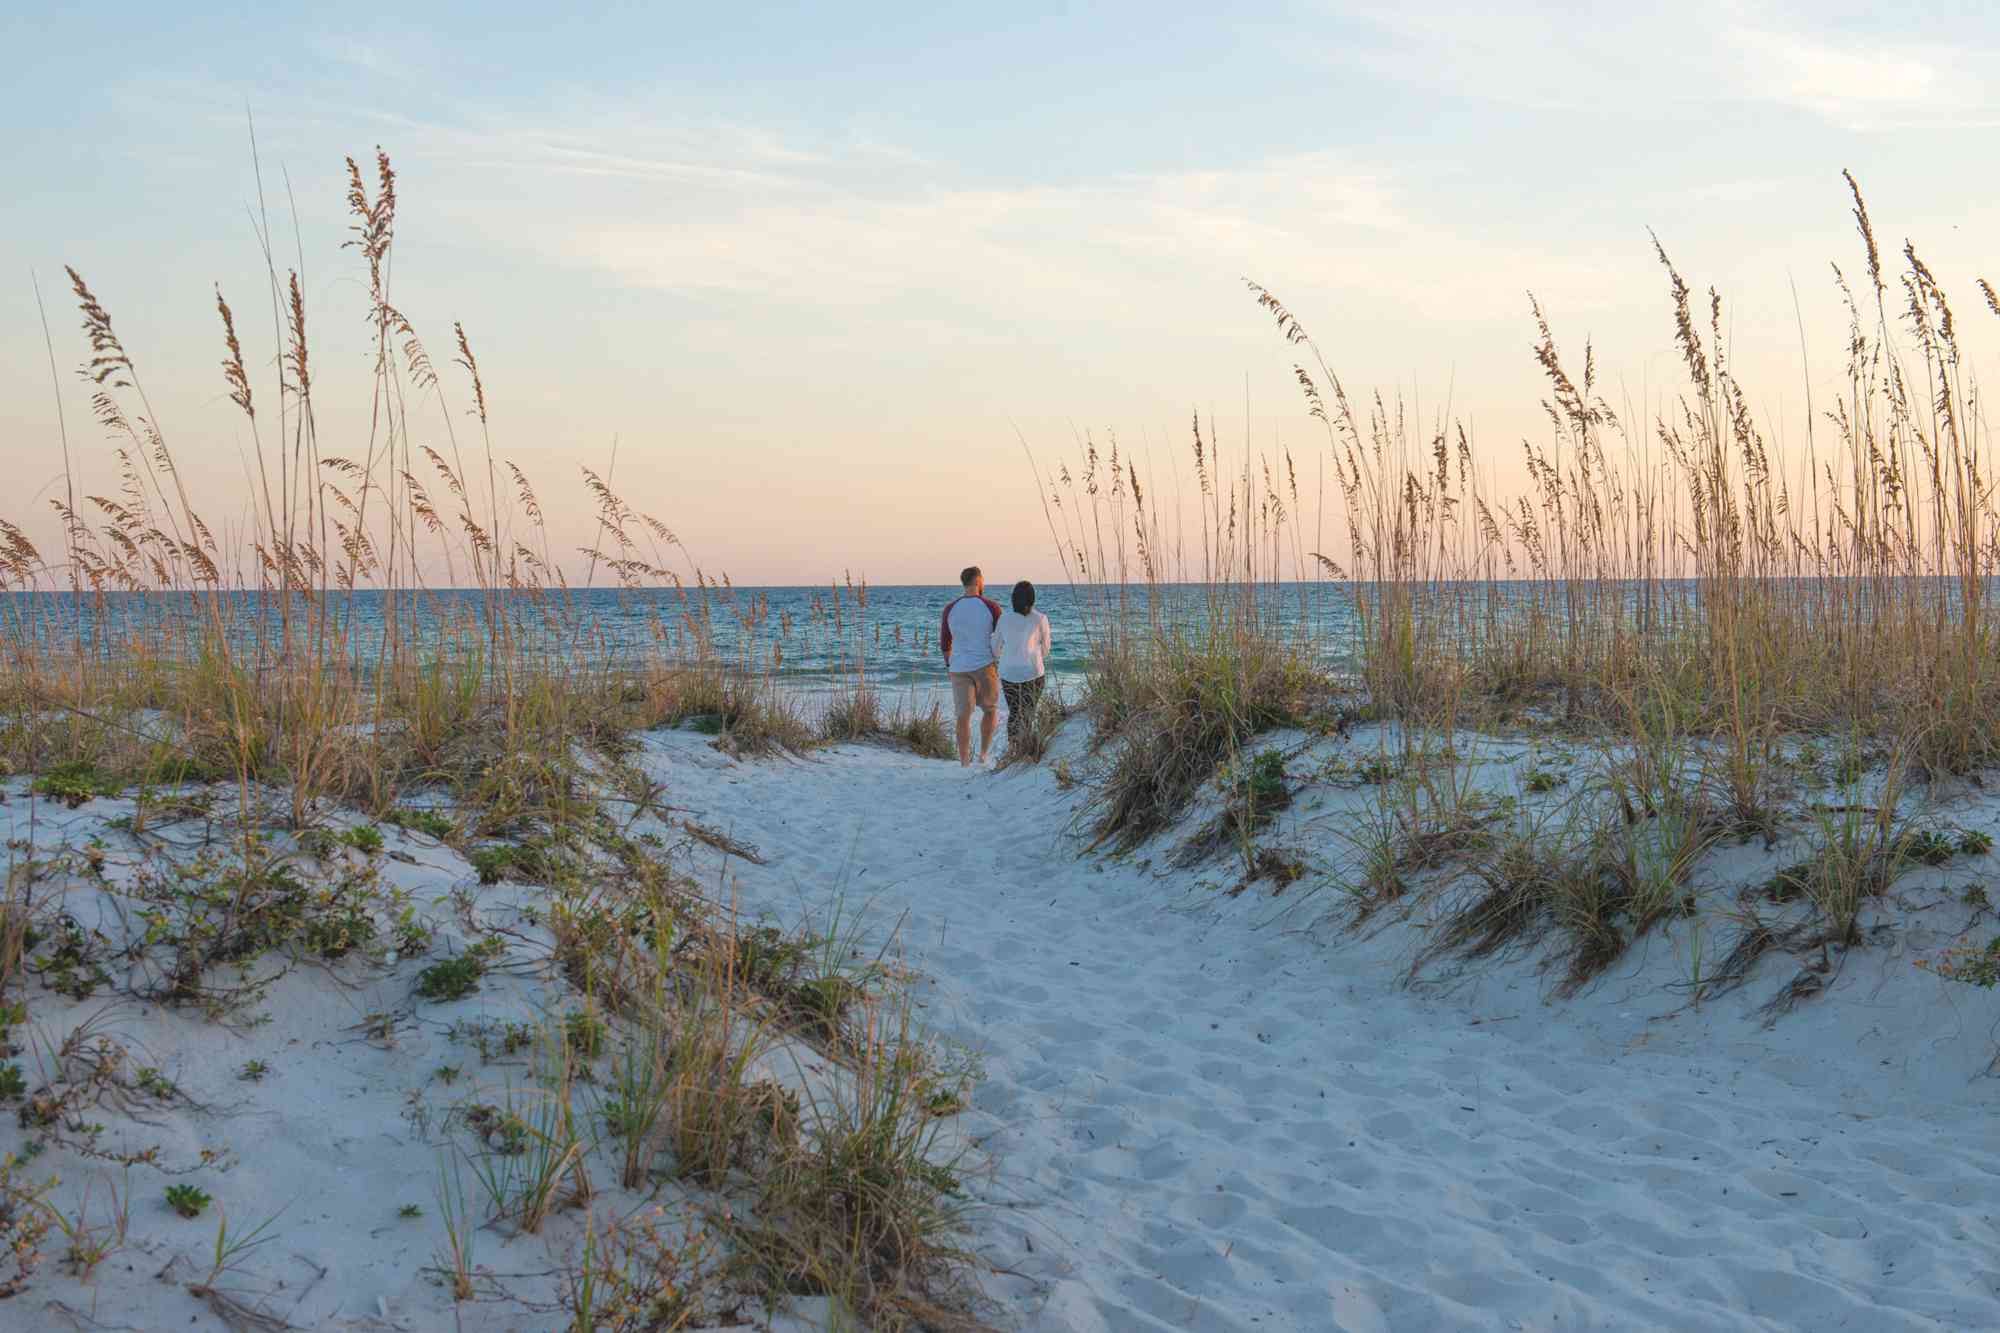 This Beautiful Florida City Has One Of The Best Beaches In The Country